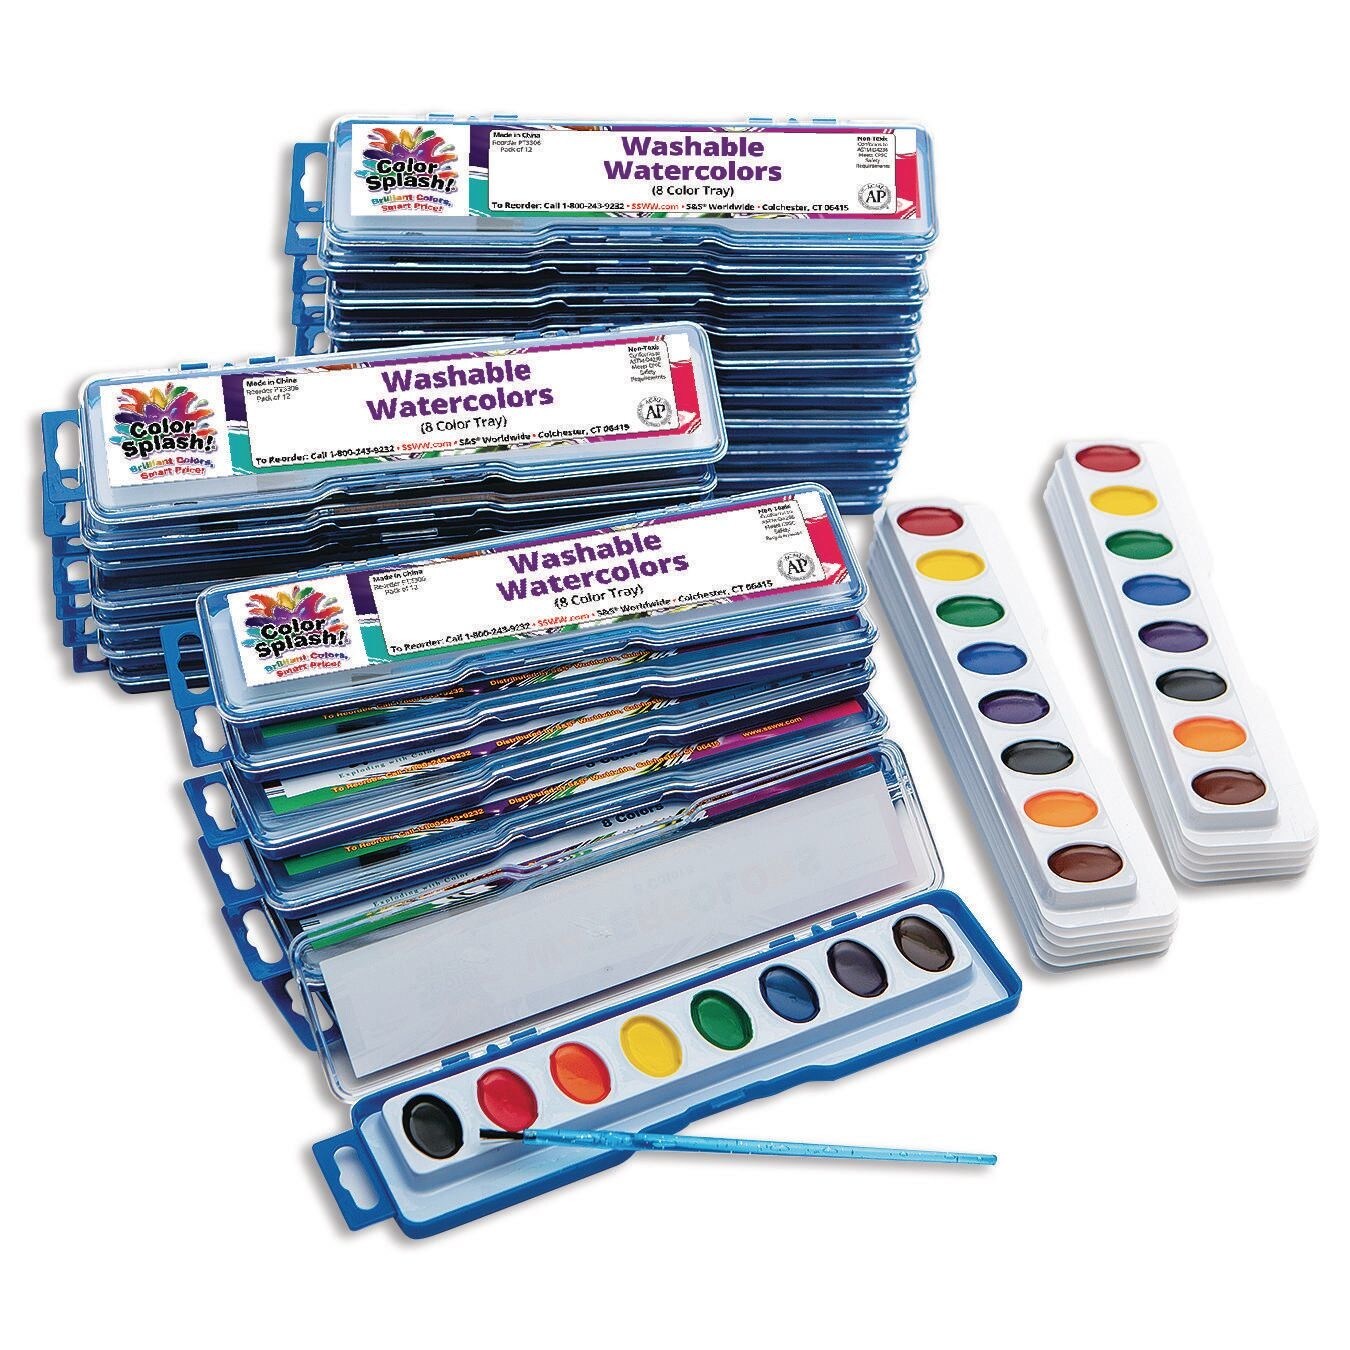 24 Watercolor Paint Sets for Kids and Adults -watercolors Paints